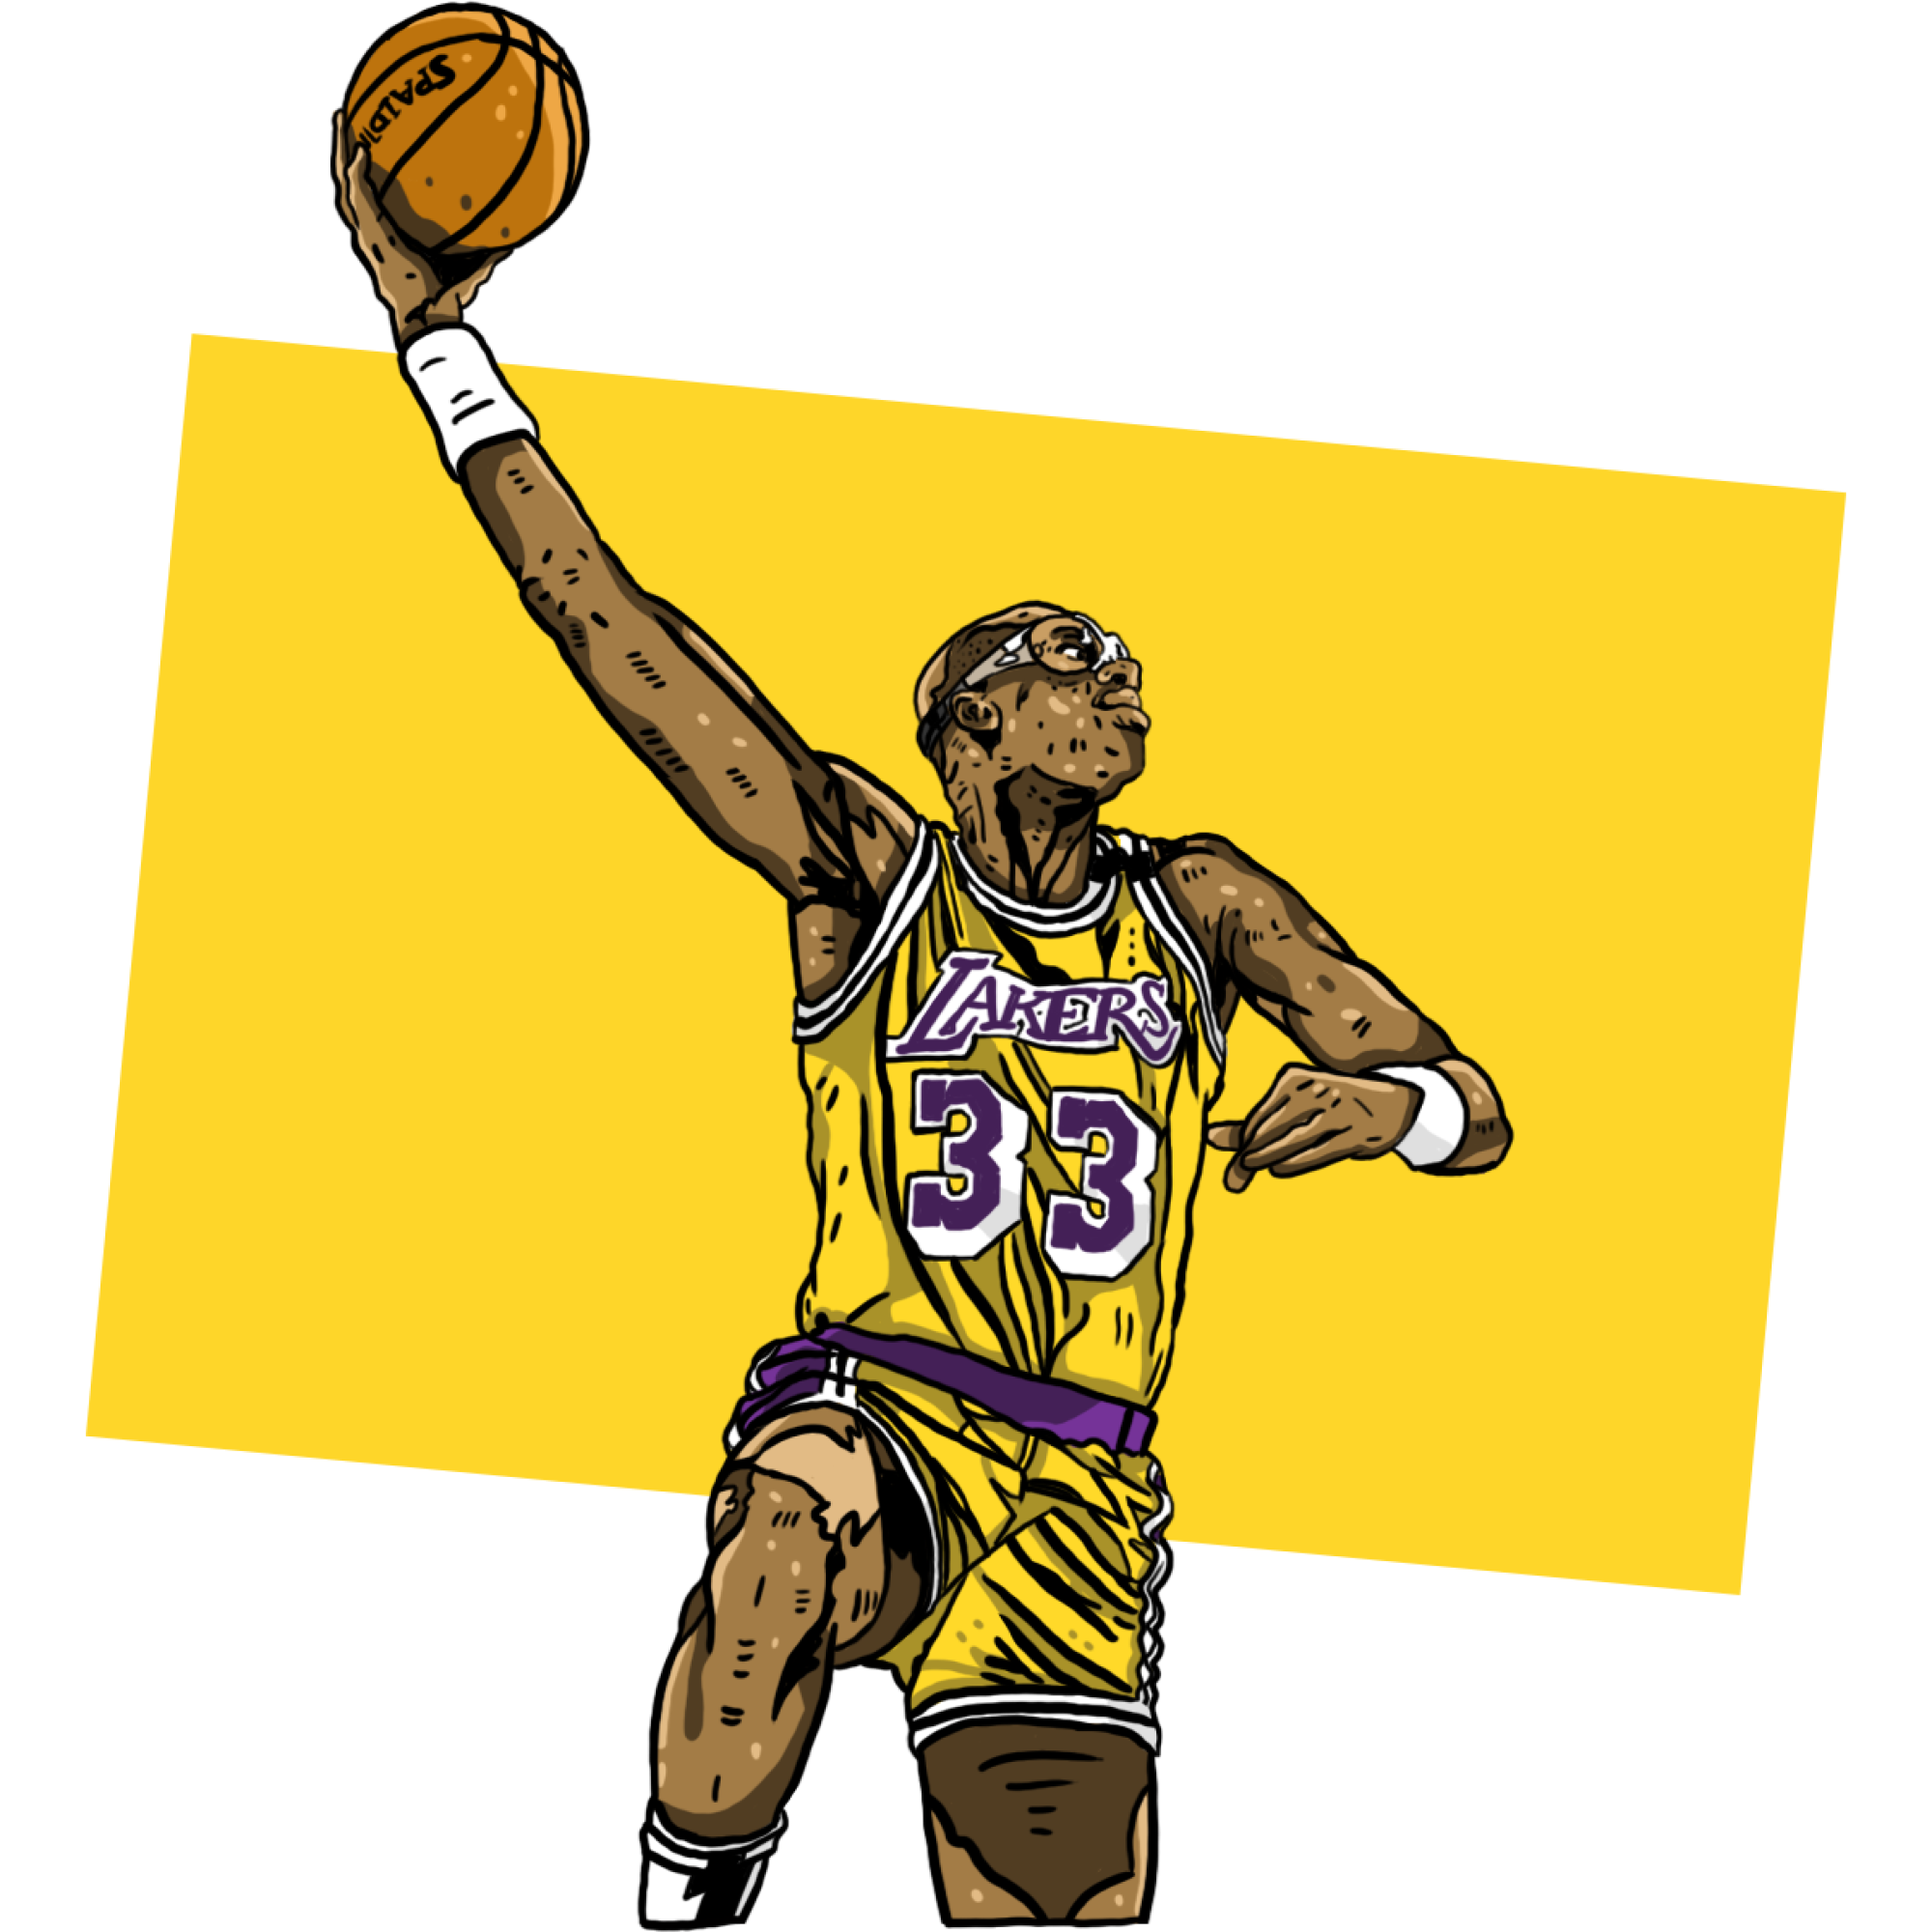 Illustration of Kareem Abdul-Jabbar in a yellow #33 jersey jumping and shooting a sky hook.